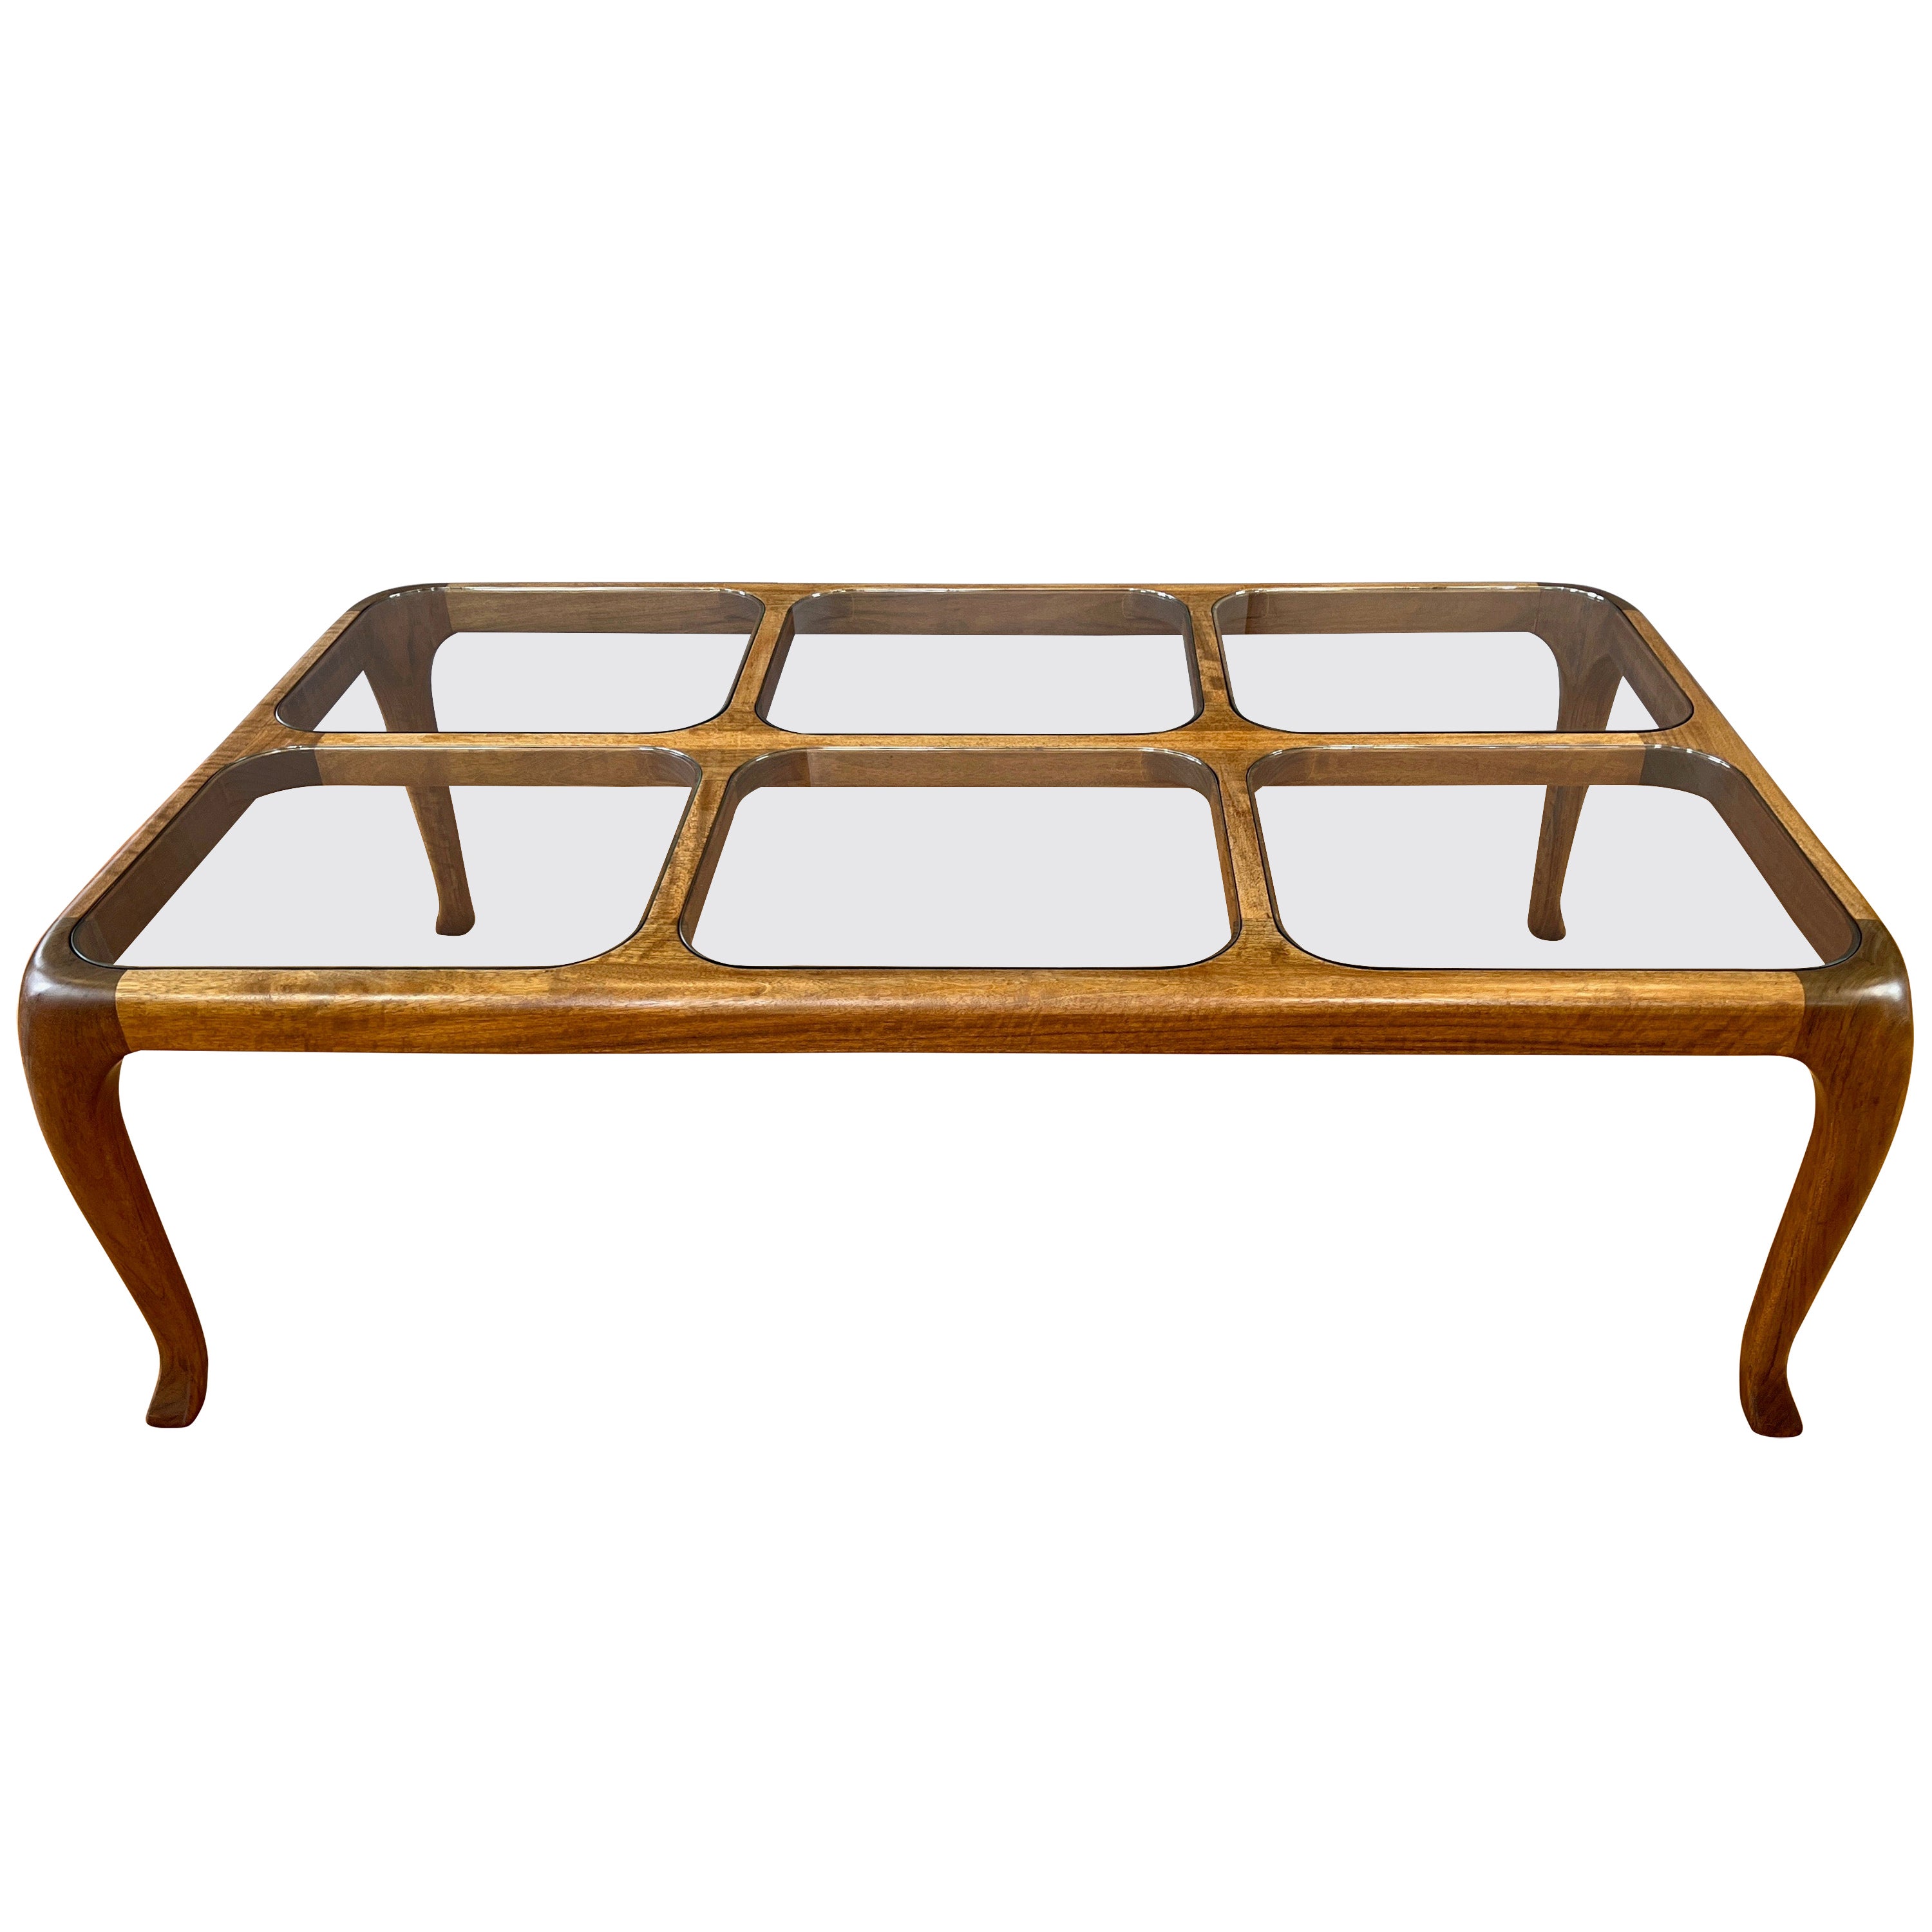 Thomas Saydah Large Walnut and Glass Coffee Table, Signed and Dated, 1982 For Sale